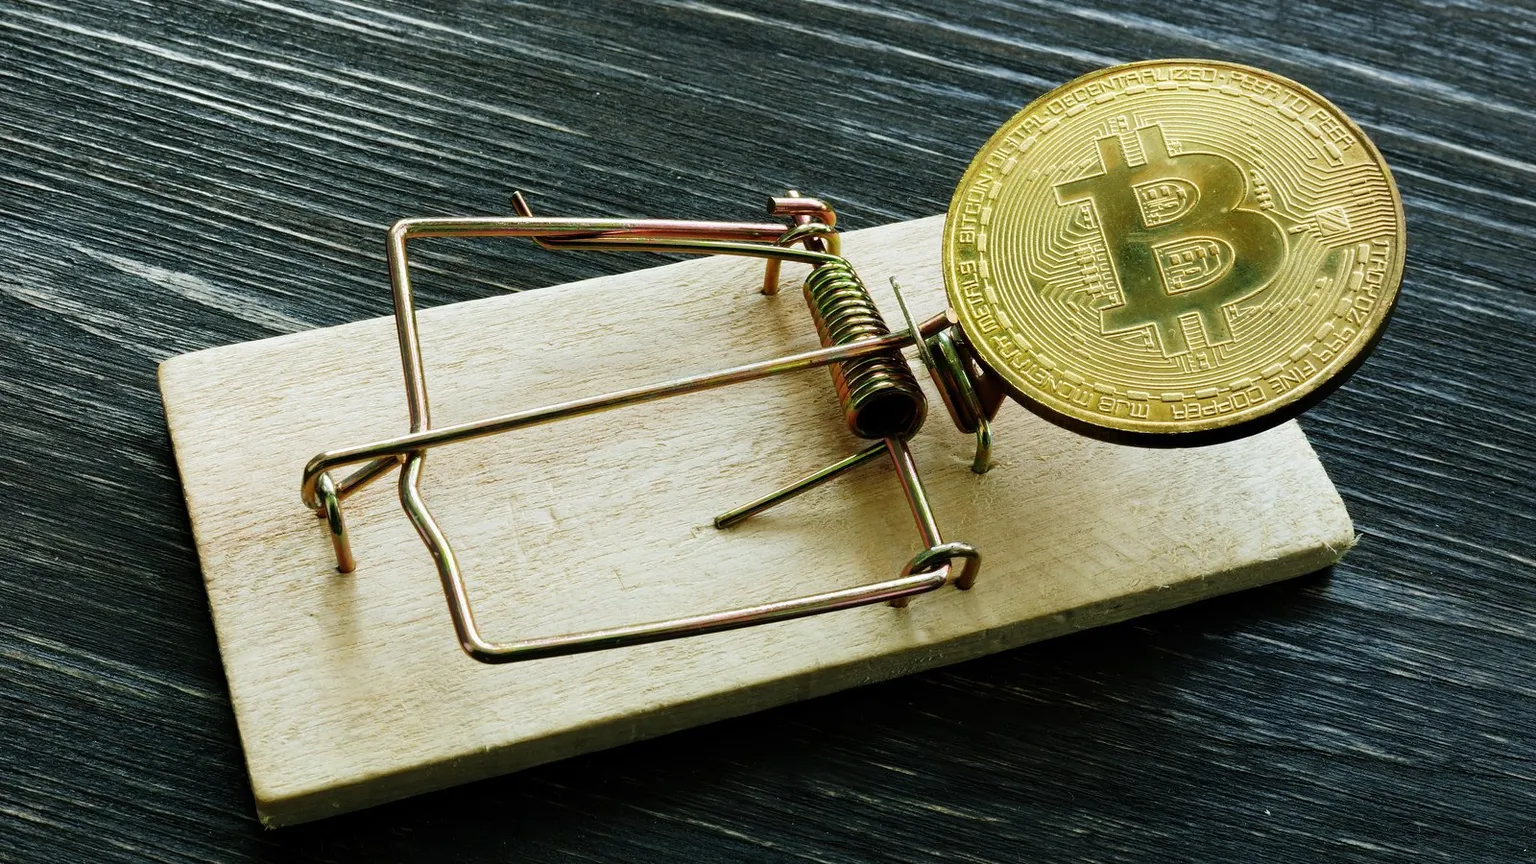 The only free Bitcoin is in the mouse trap. Image: Shutterstock